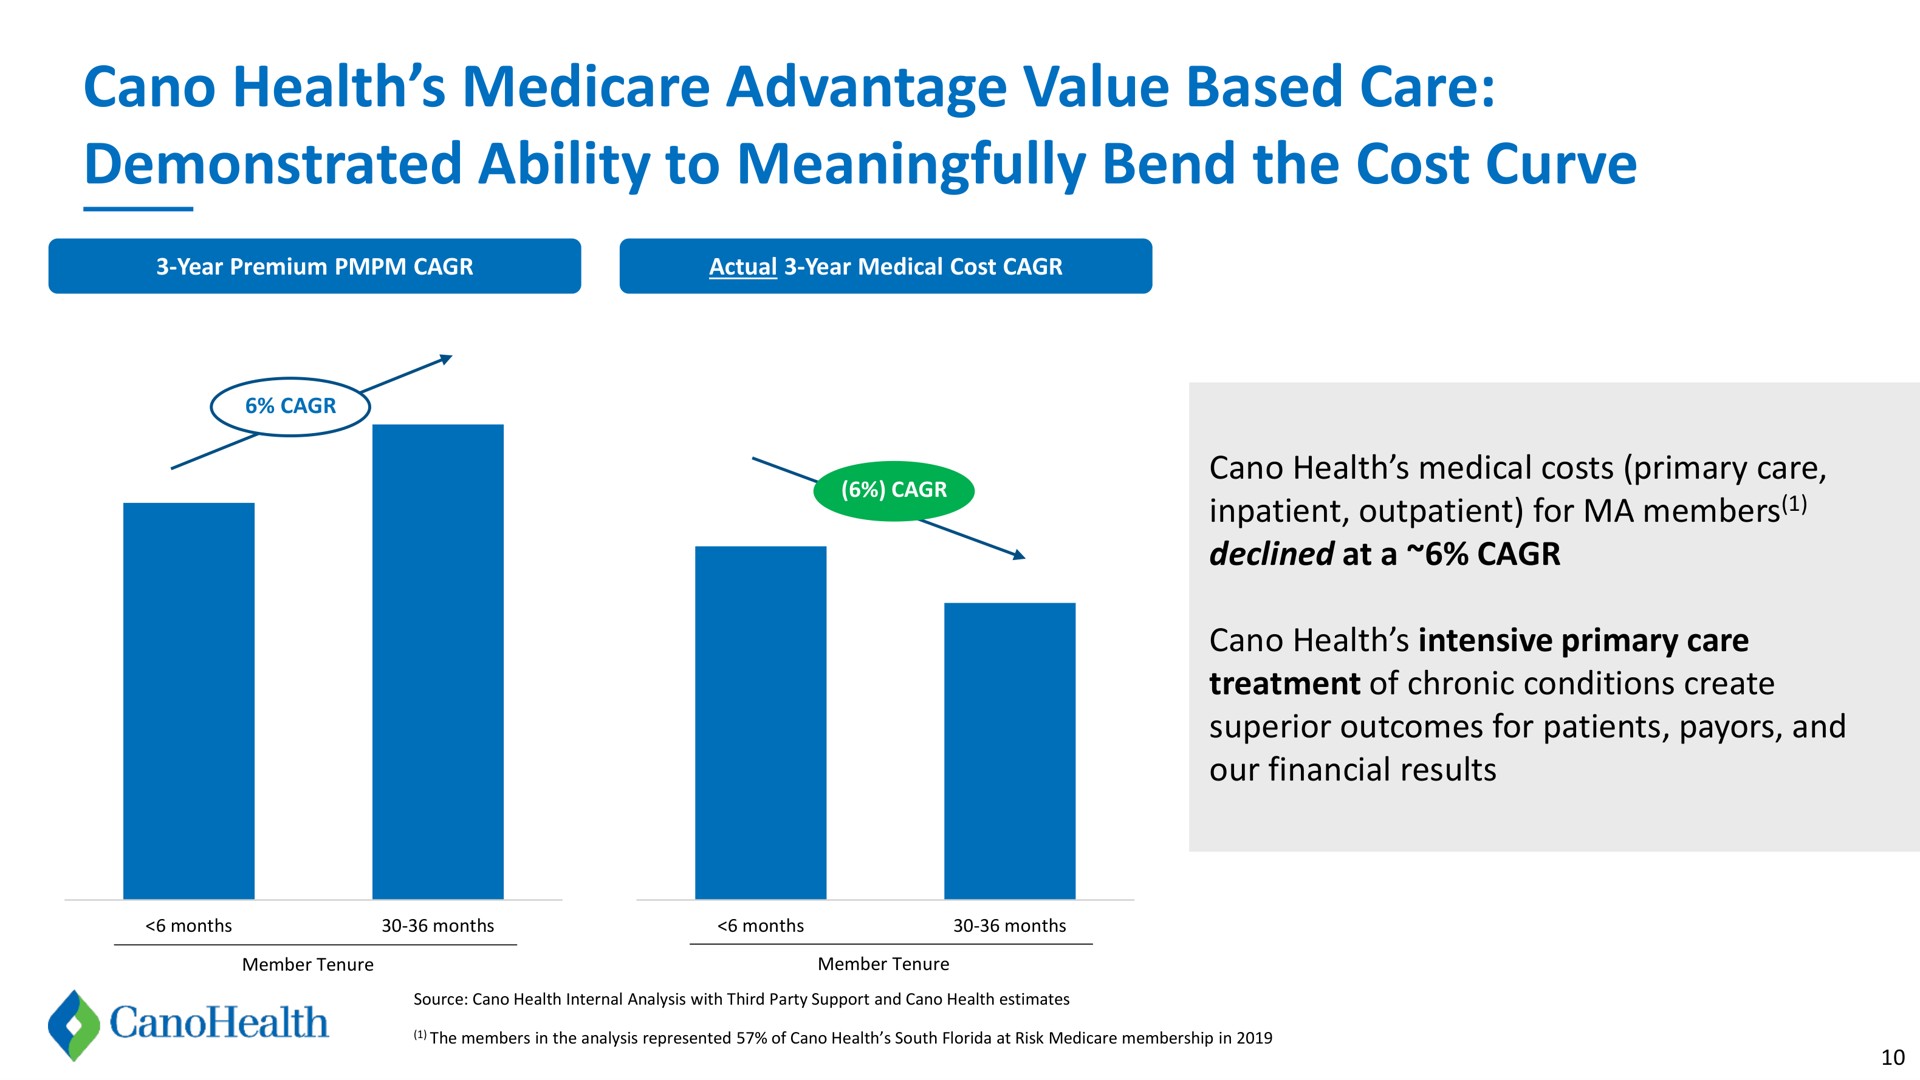 health advantage value based care demonstrated ability to meaningfully bend the cost curve | Cano Health